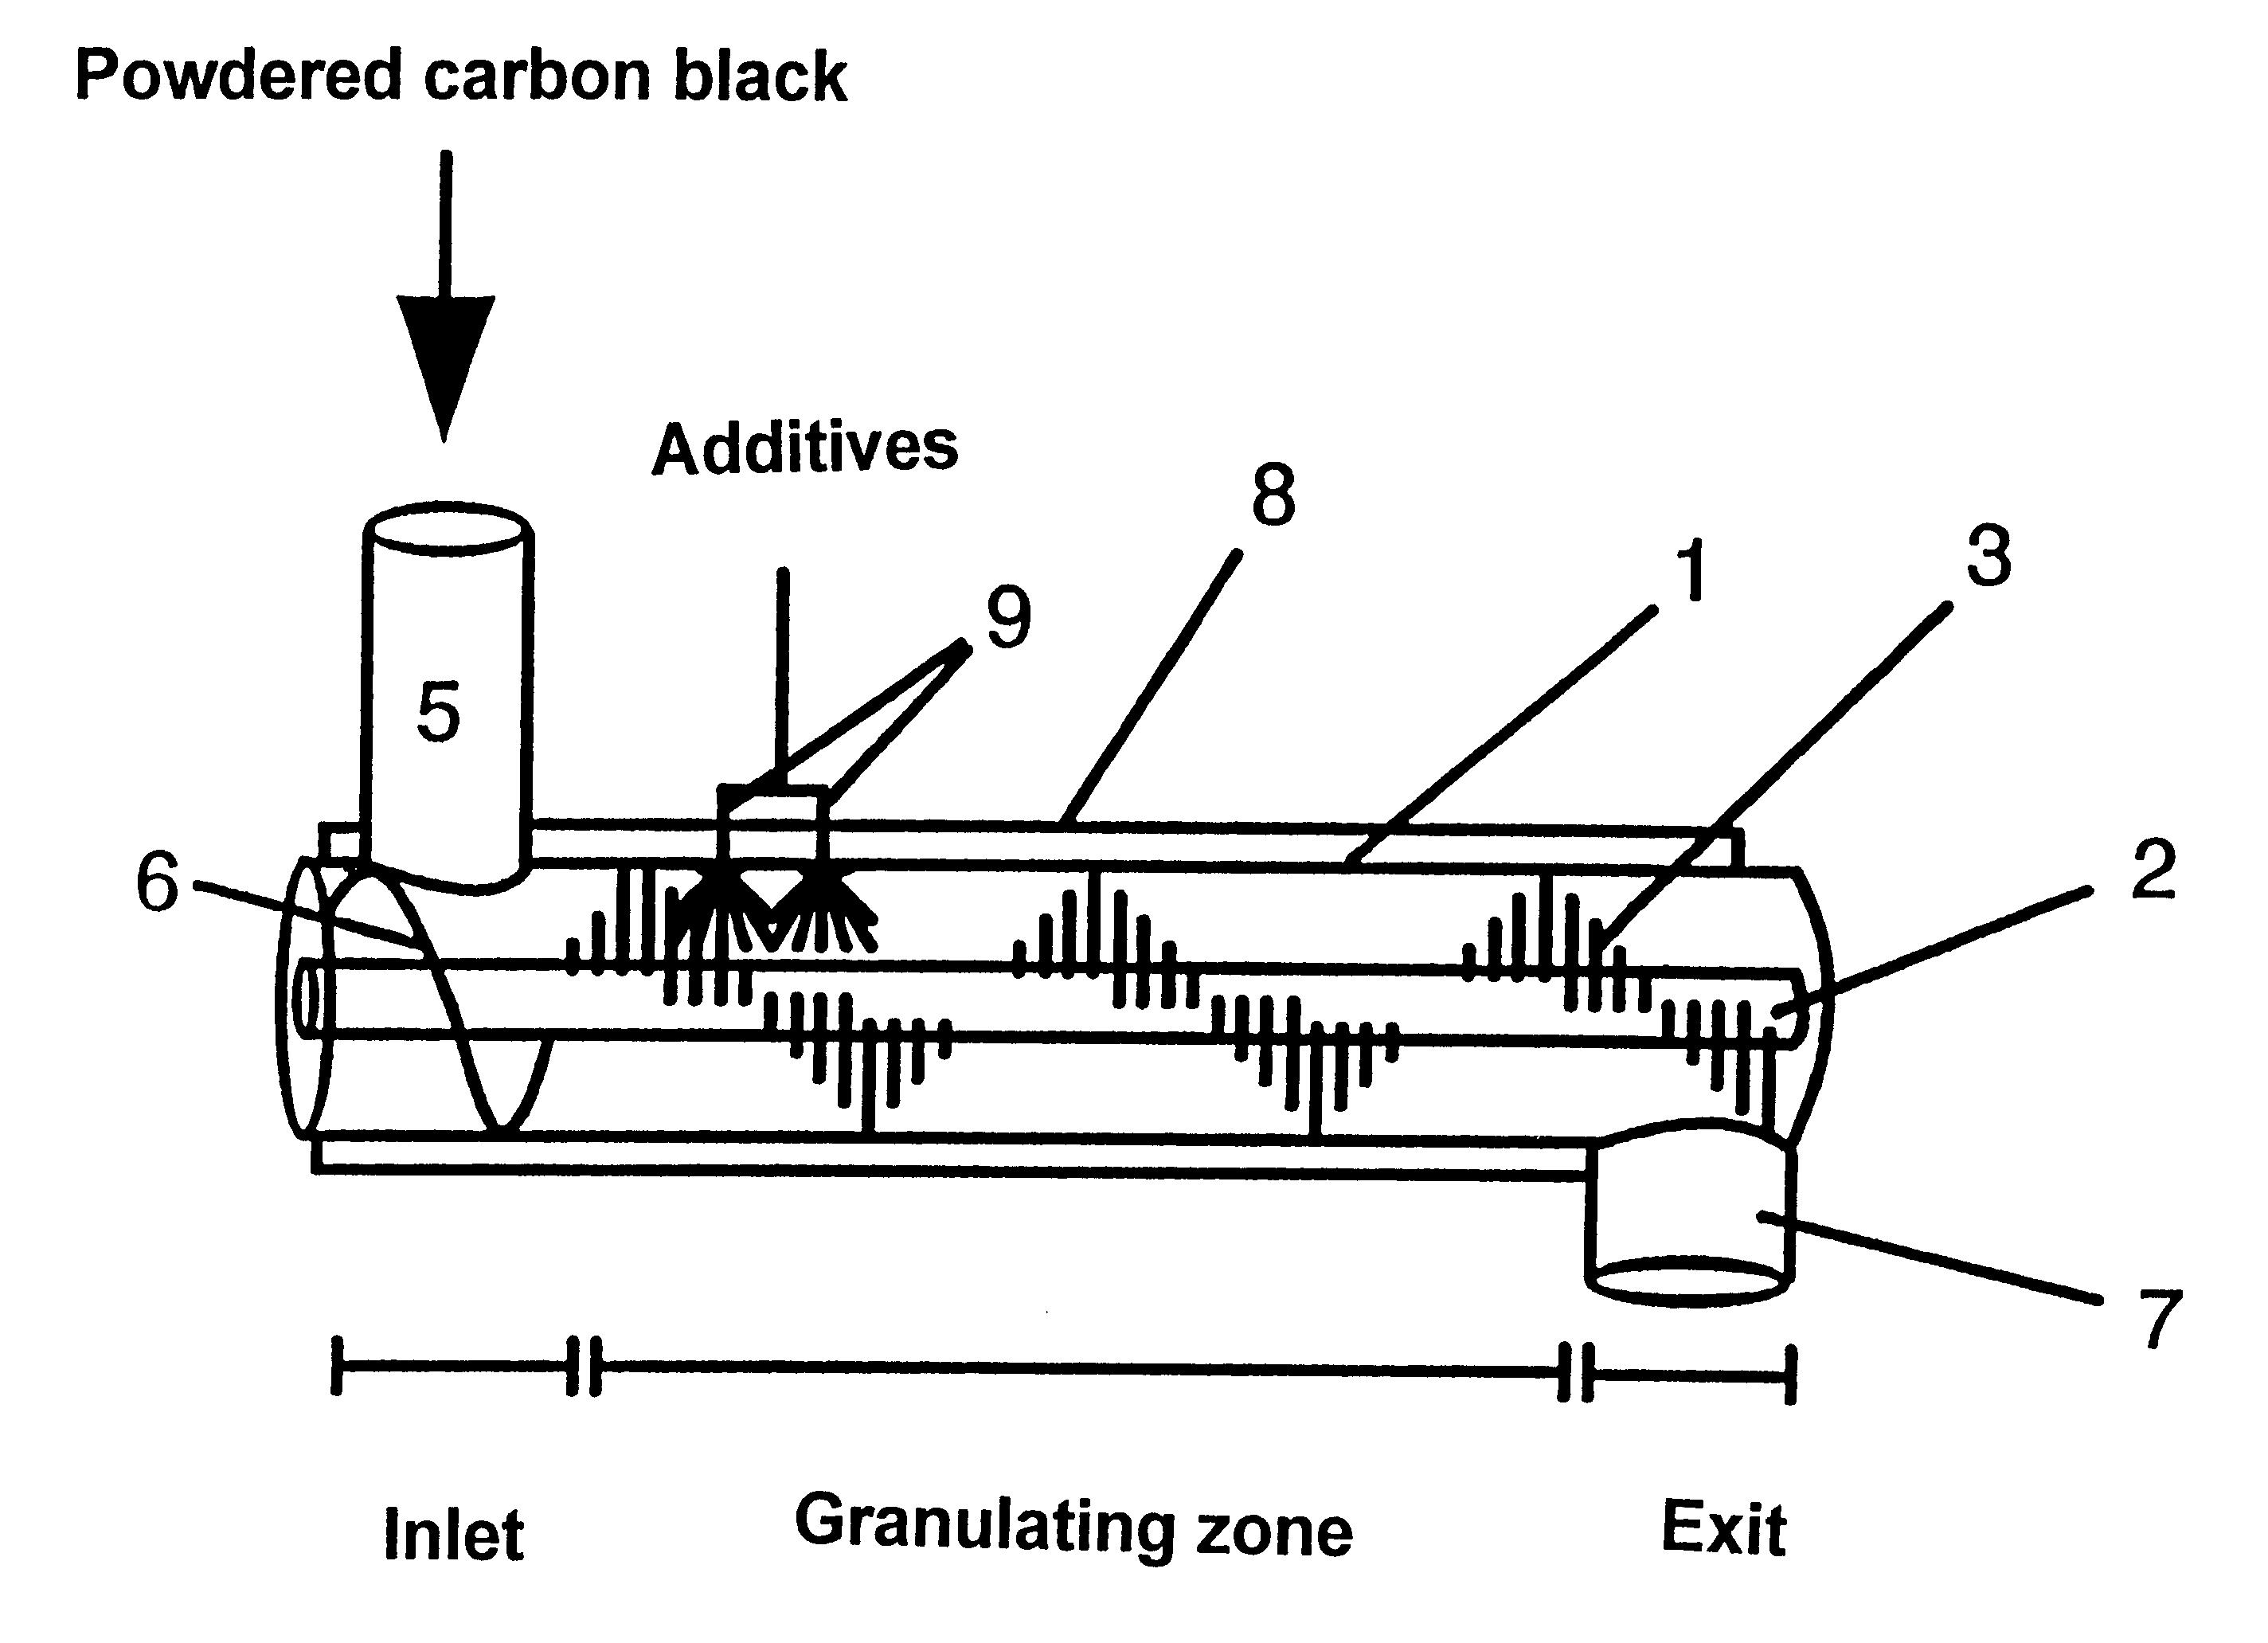 Process for continuous dry granulation of powered carbon black